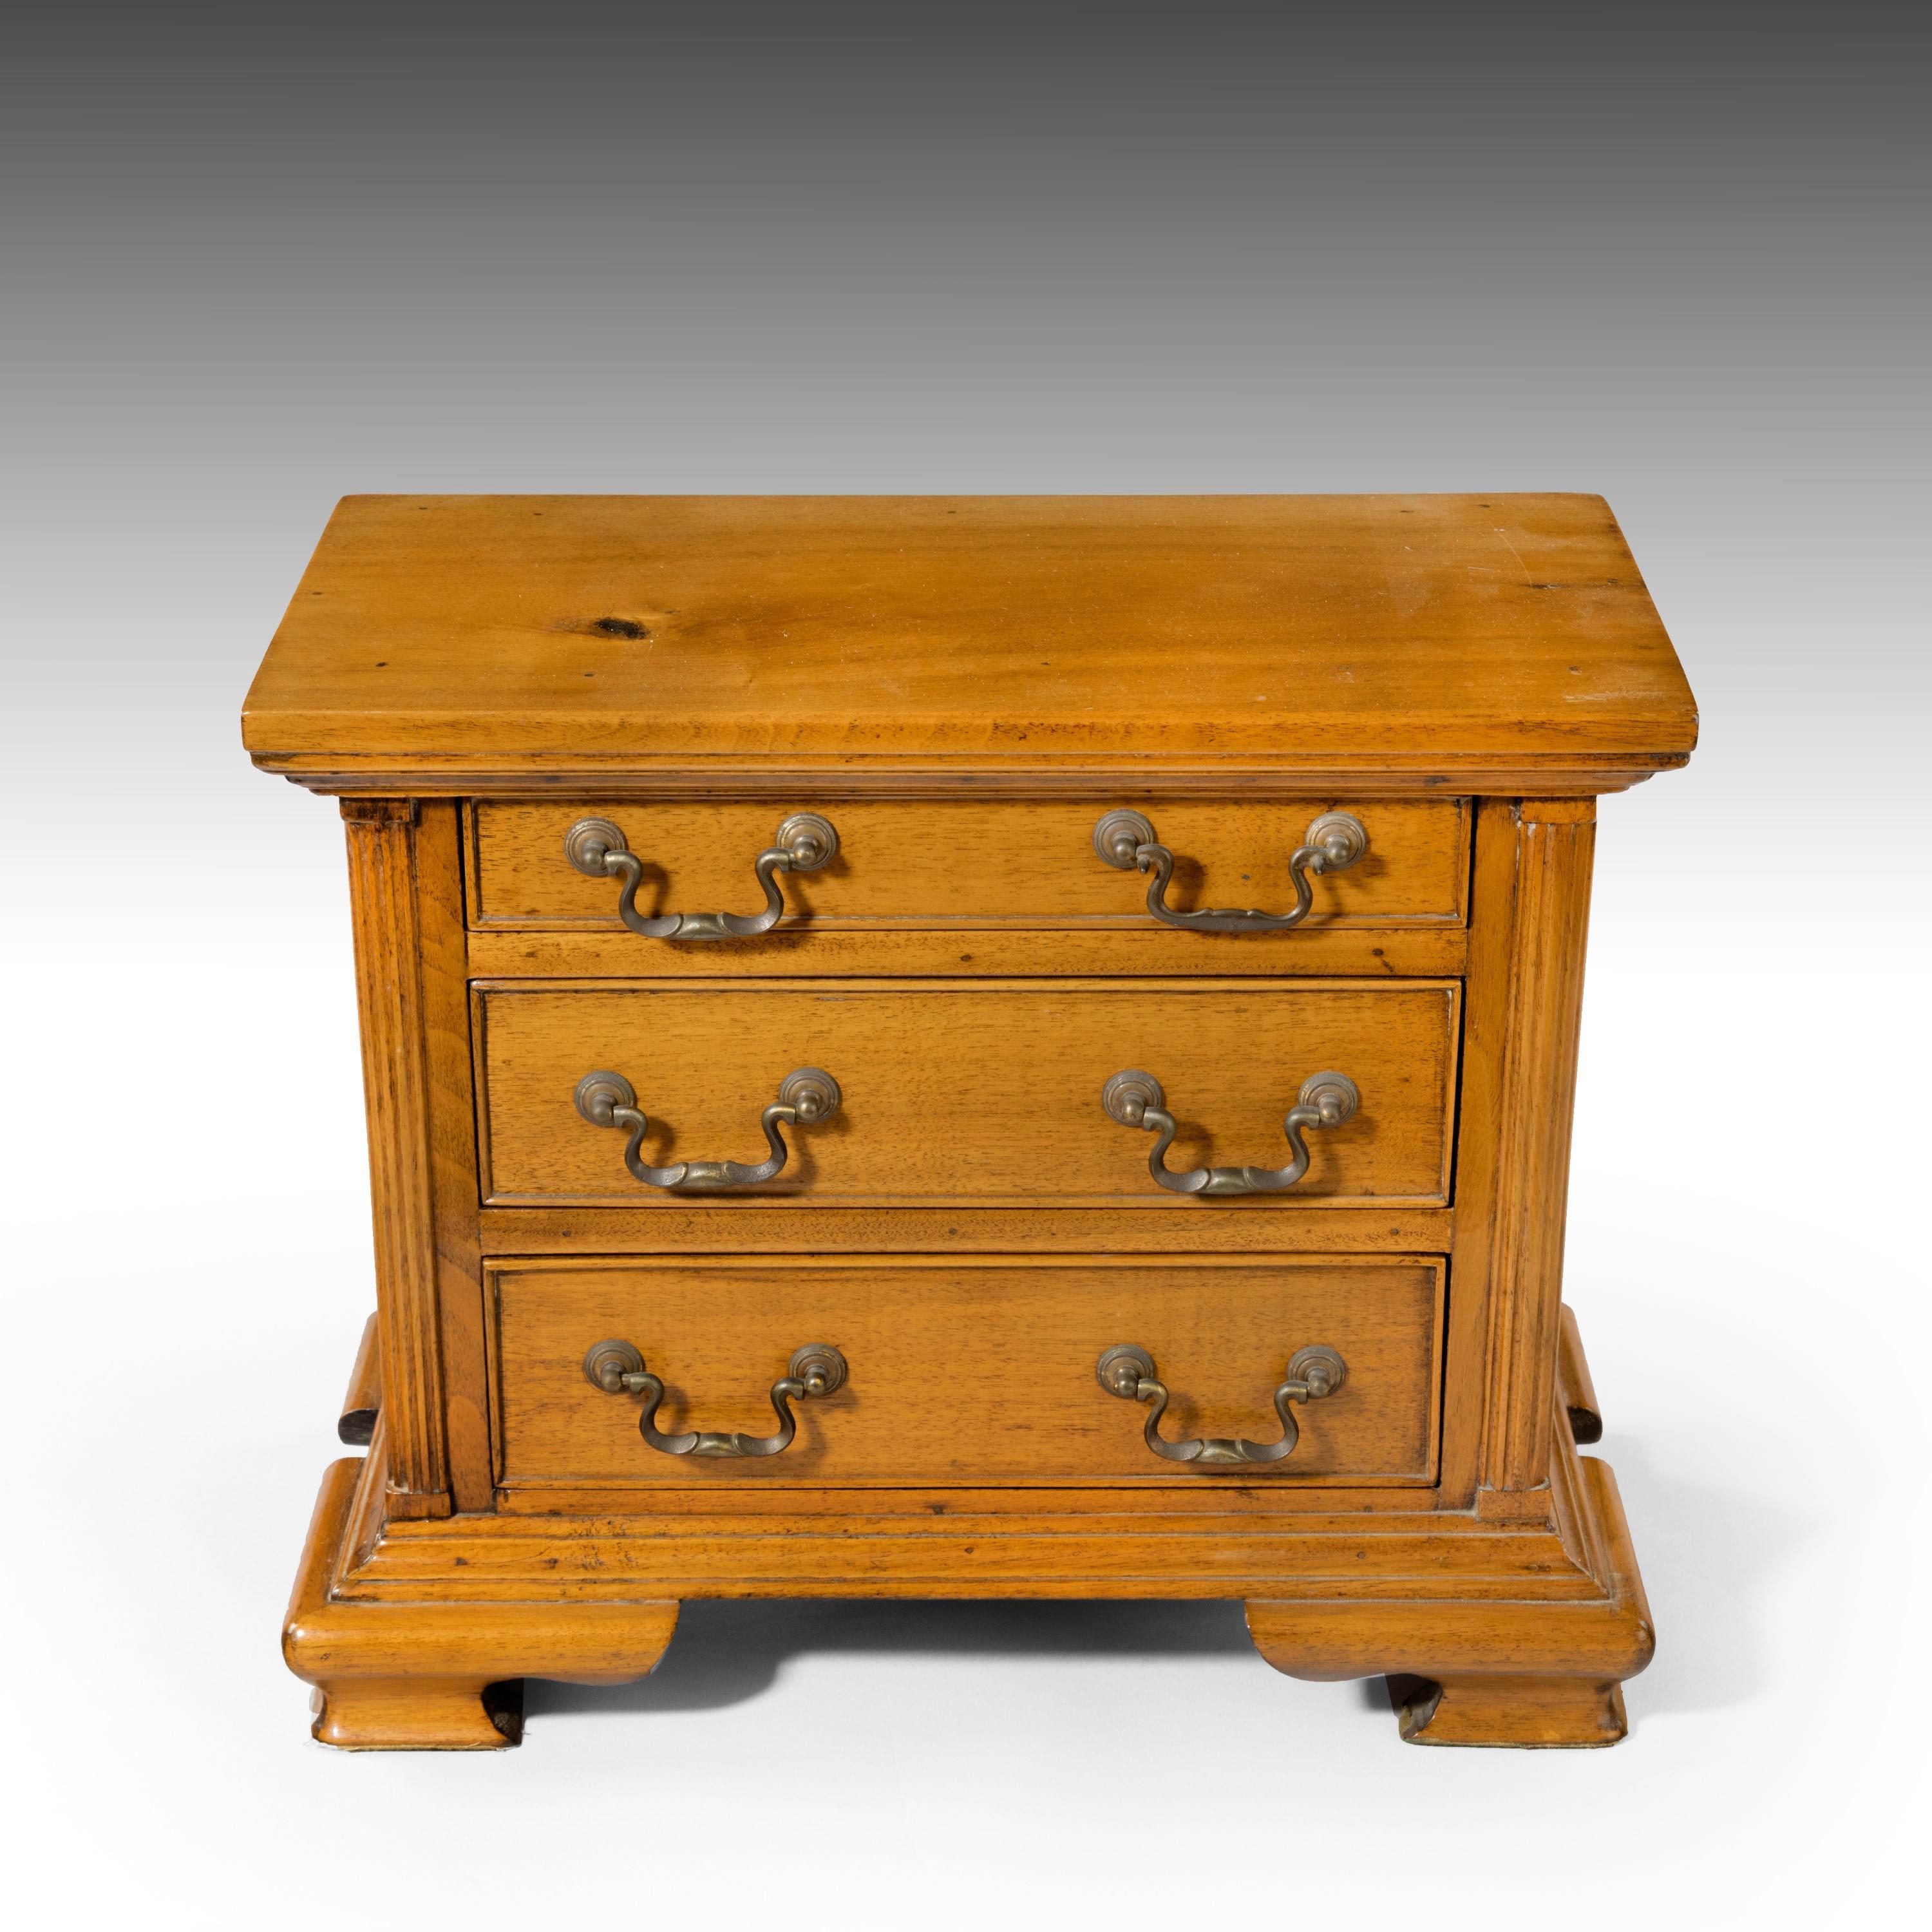 A very finely made apprentice chest of drawers in golden mahogany. With swan-necked bronze handles and very strongly formed ogee feet.
 